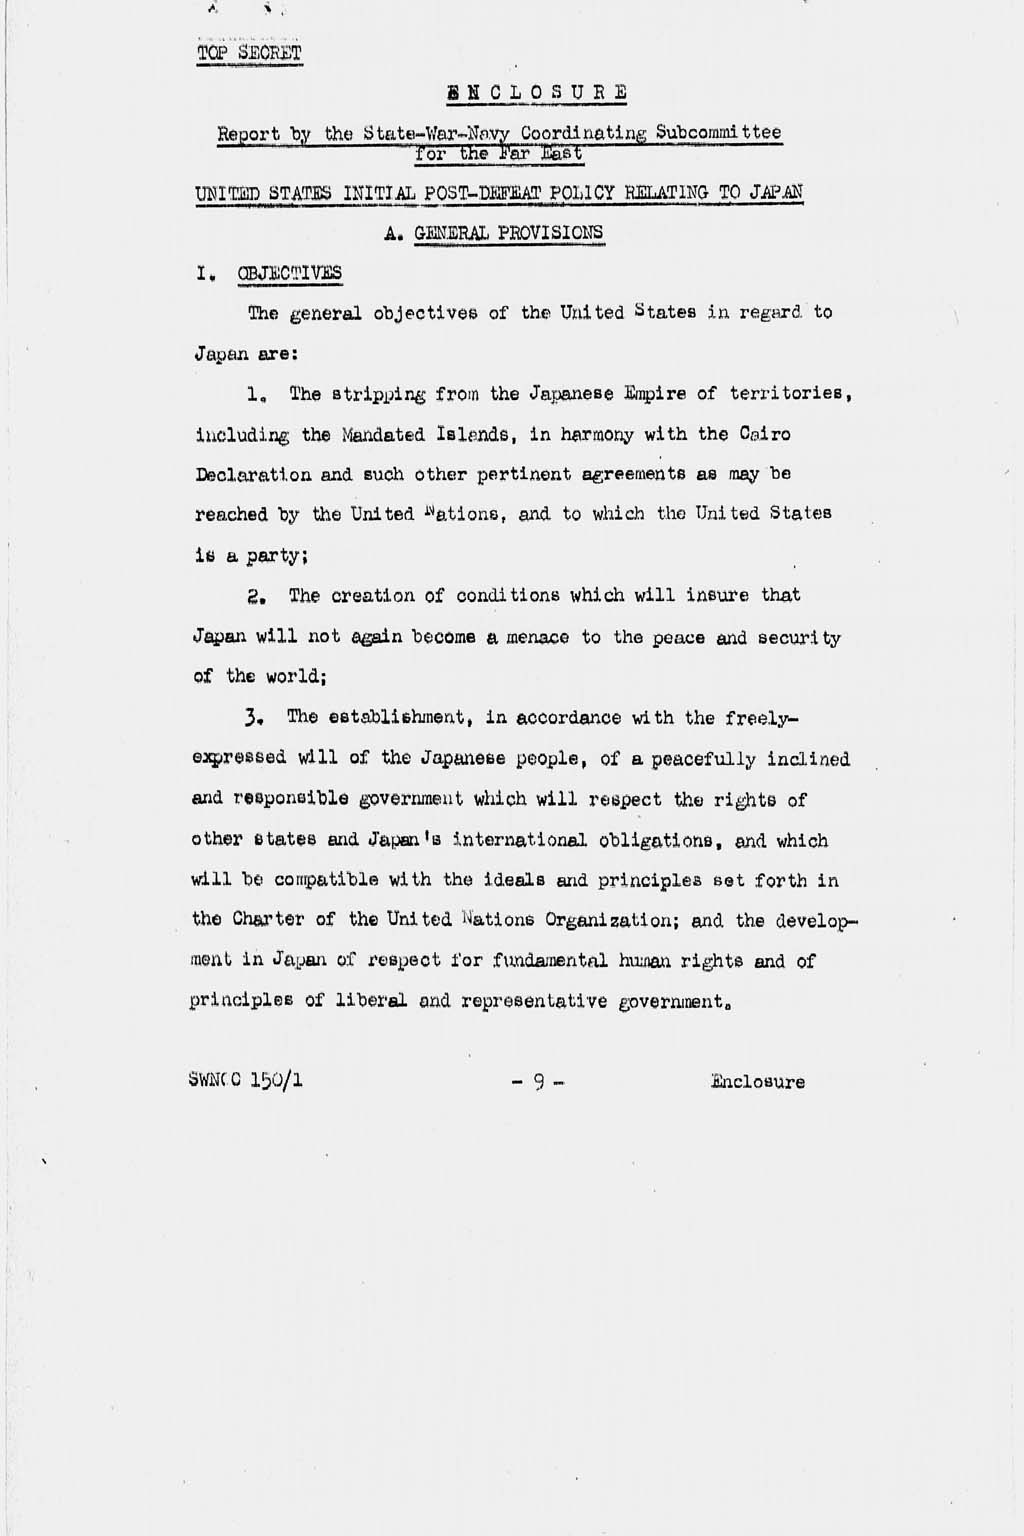 [United States Initial Post-Defeat Policy Relating to Japan (SWNCC150/1)](Larger image)